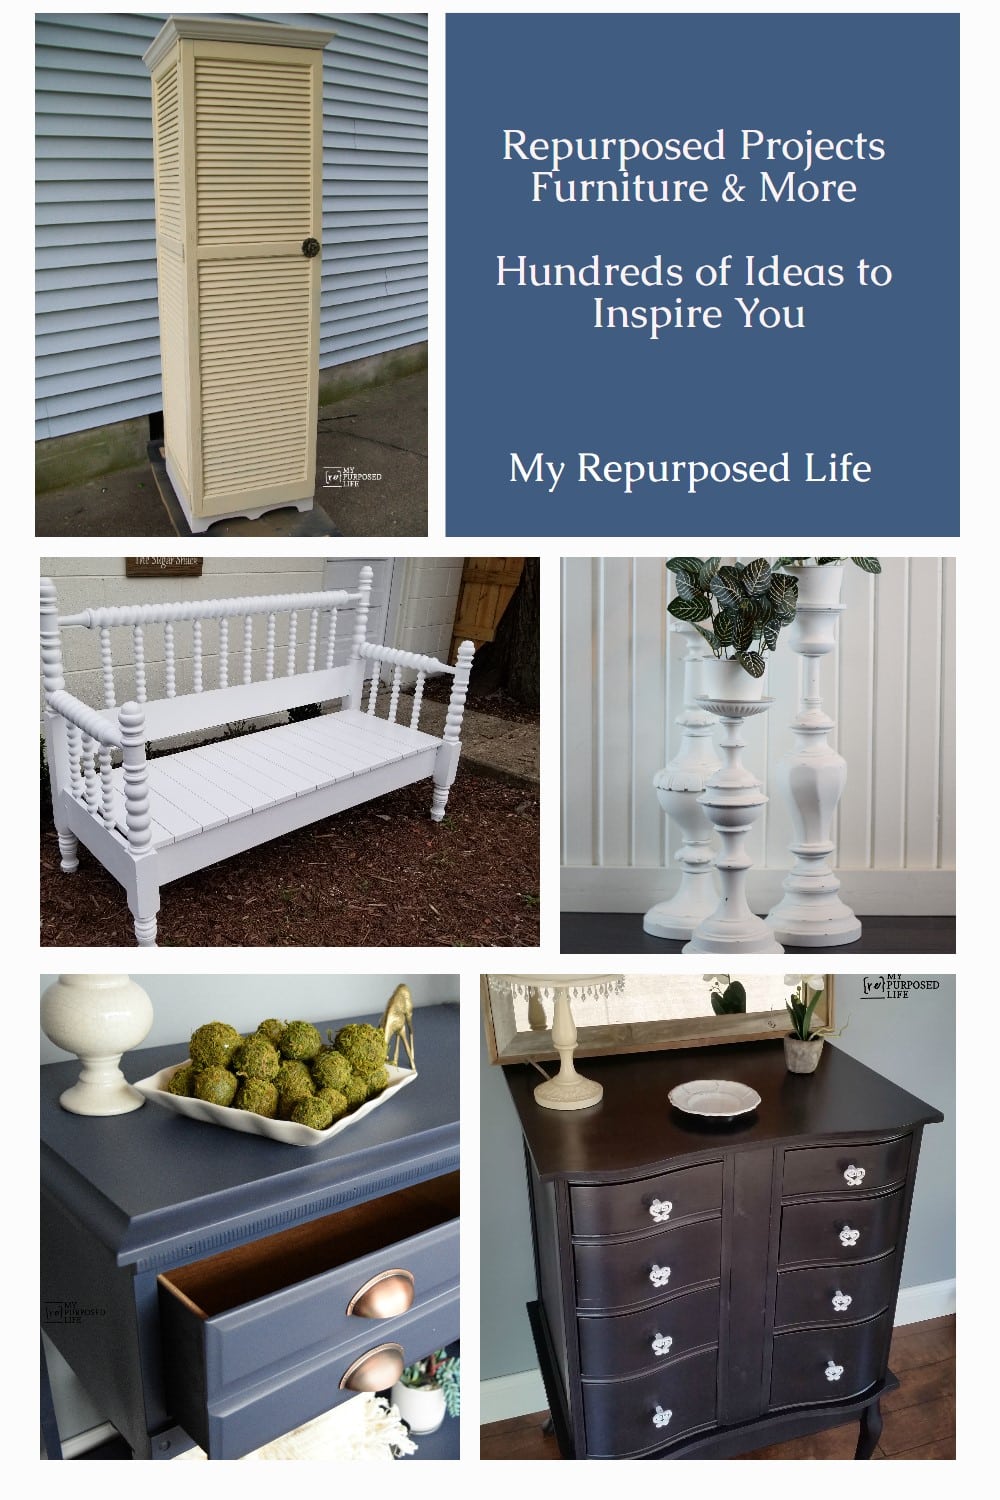 This collection of repurposed and upcycled furniture and household items is huge. Hundreds of projects to inspire you to DIY this weekend. So many ideas. #MyRepurposedLife via @repurposedlife